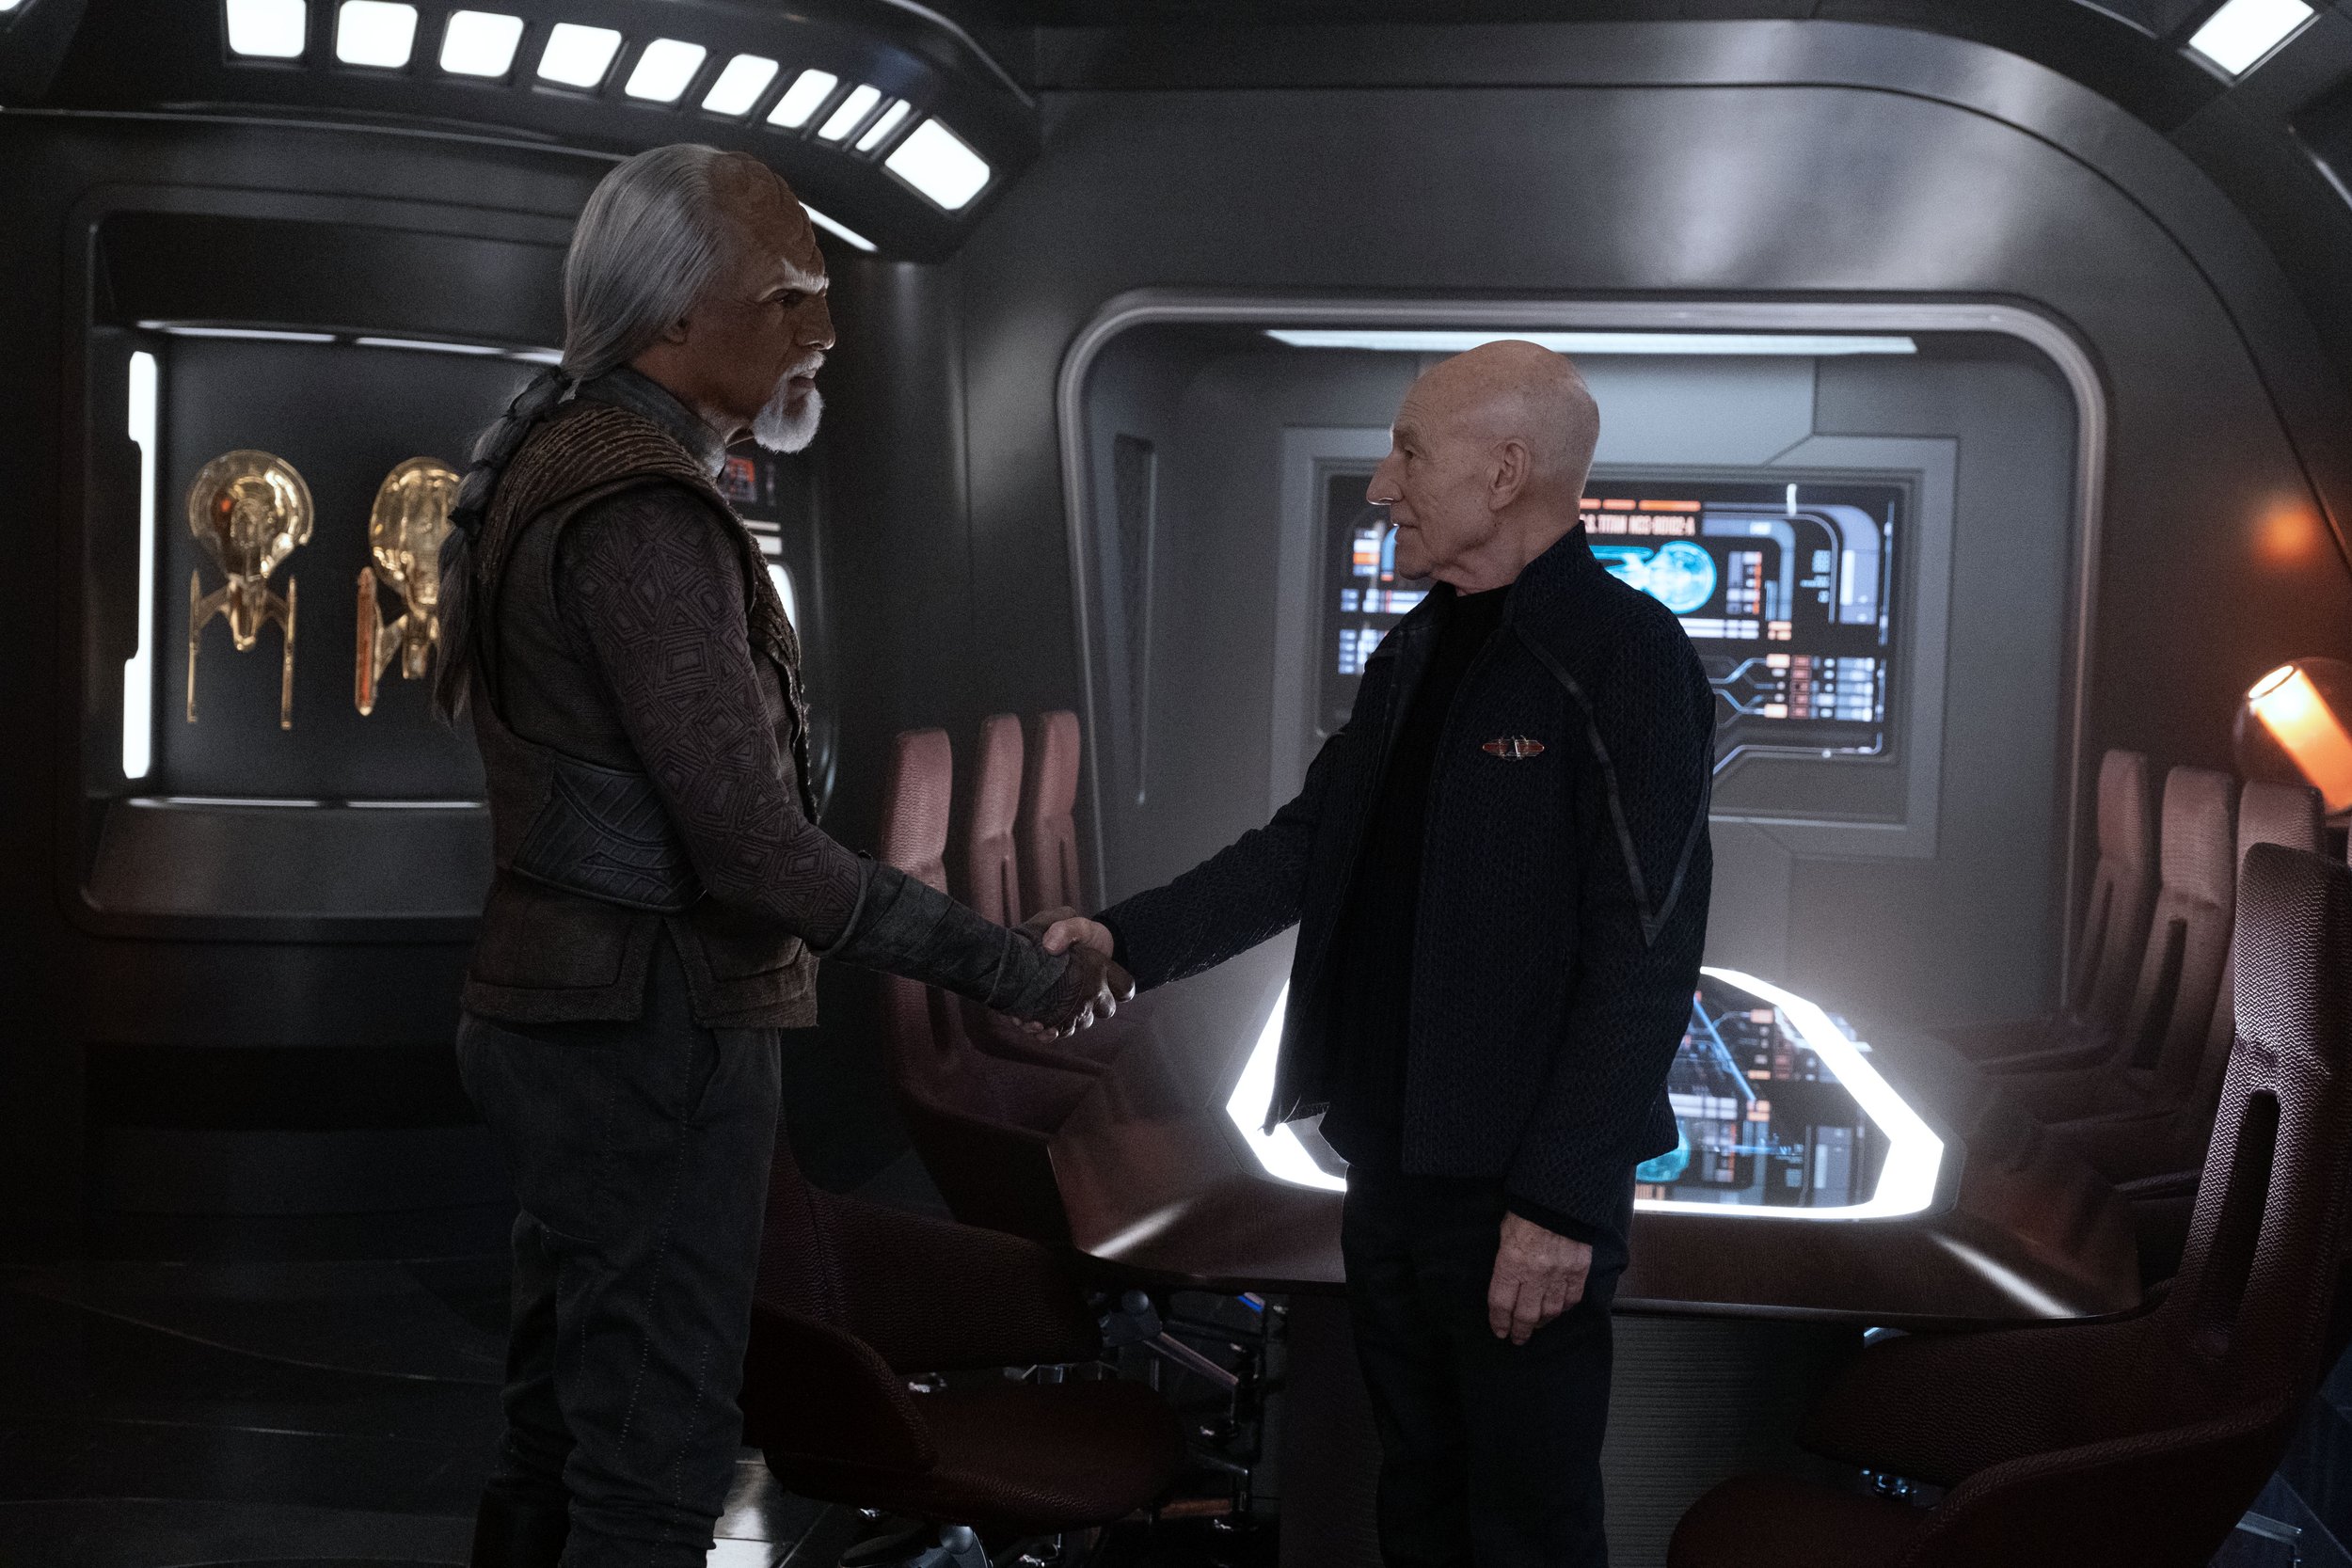   Michael Dorn  as Worf and  Patrick Stewart  as Picard.  Photo Credit: Trae Patton/Paramount+.  